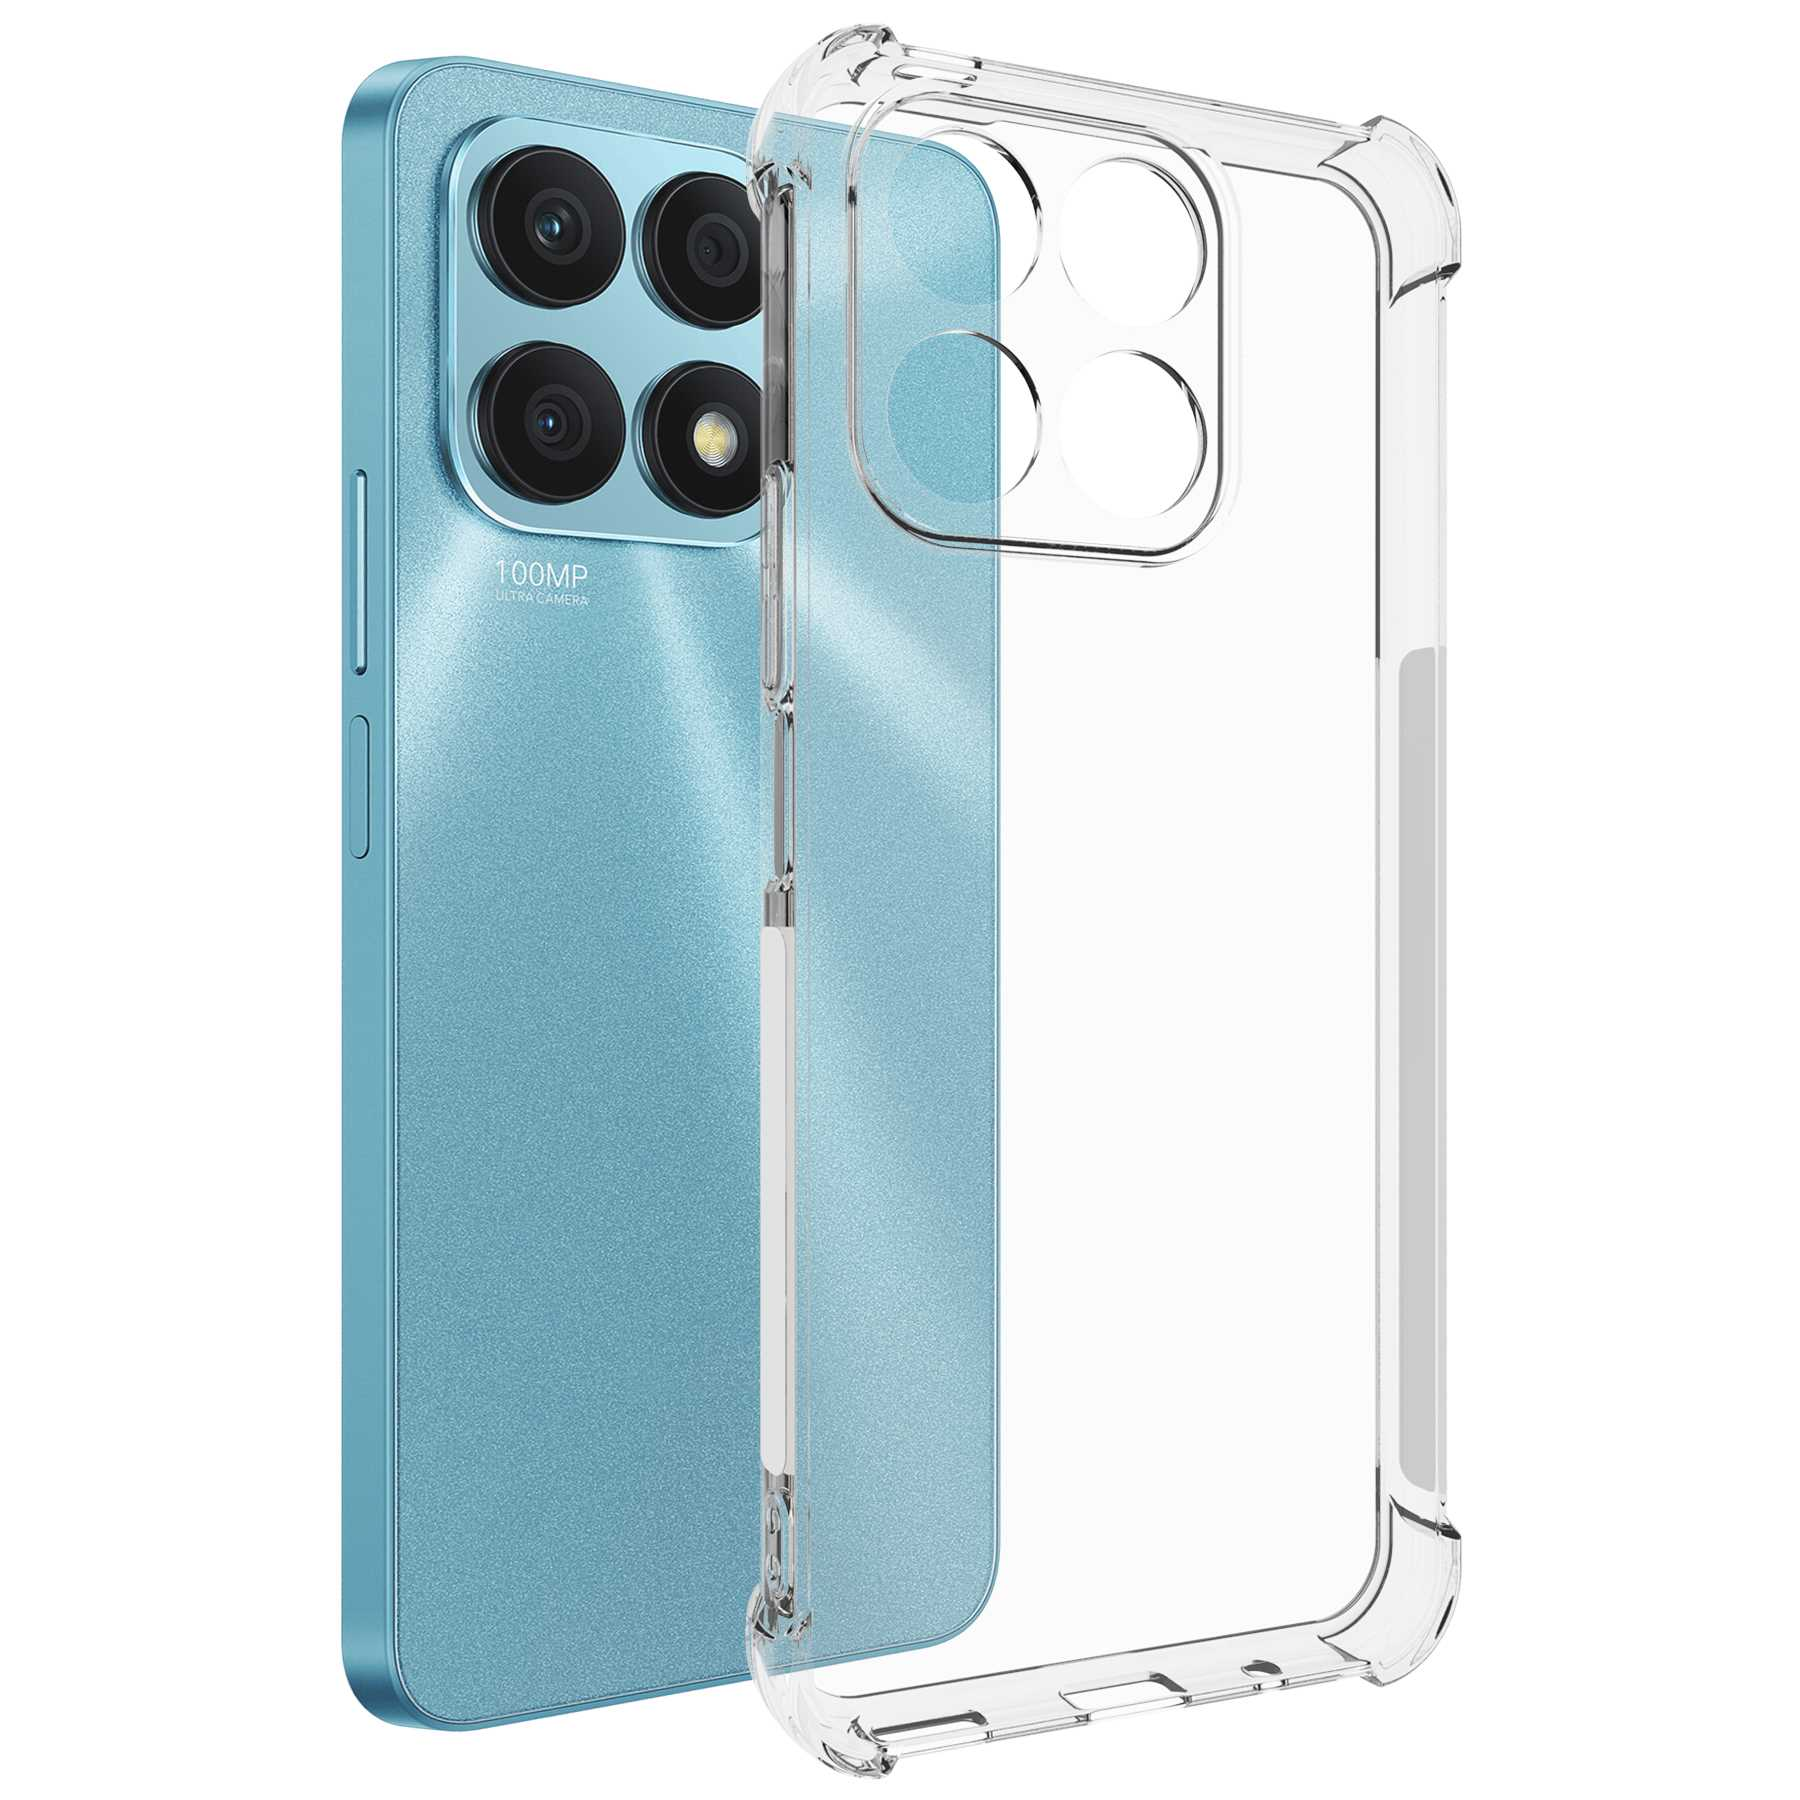 MORE Armor Clear MTB X8A, ENERGY Backcover, Honor, Transparent Case,